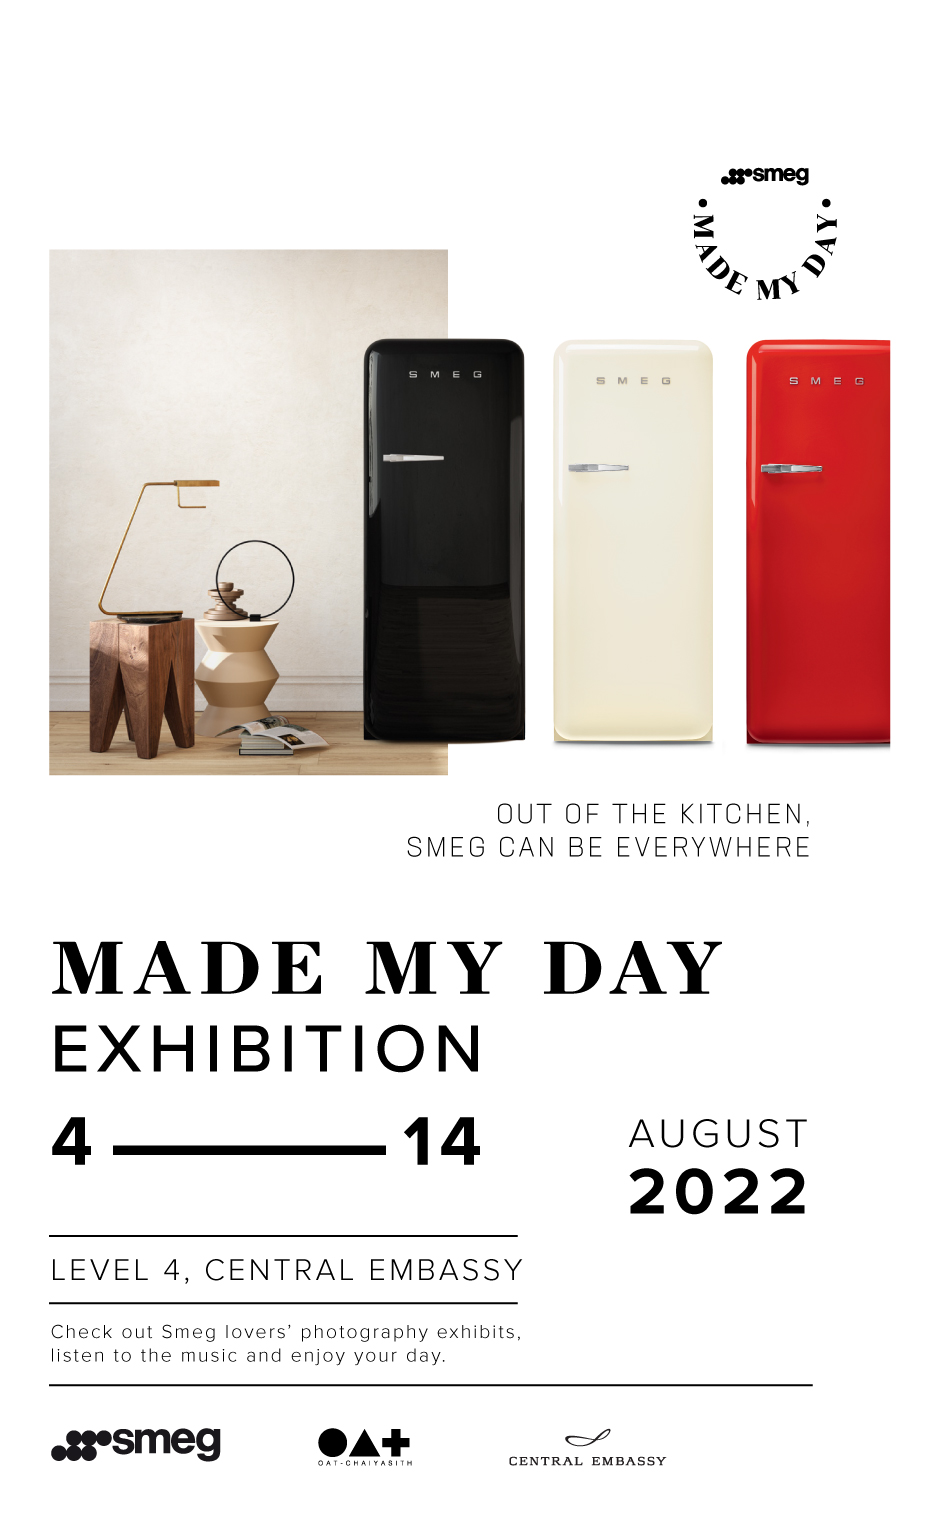 SMEG MADE MY DAY EXHIBITION